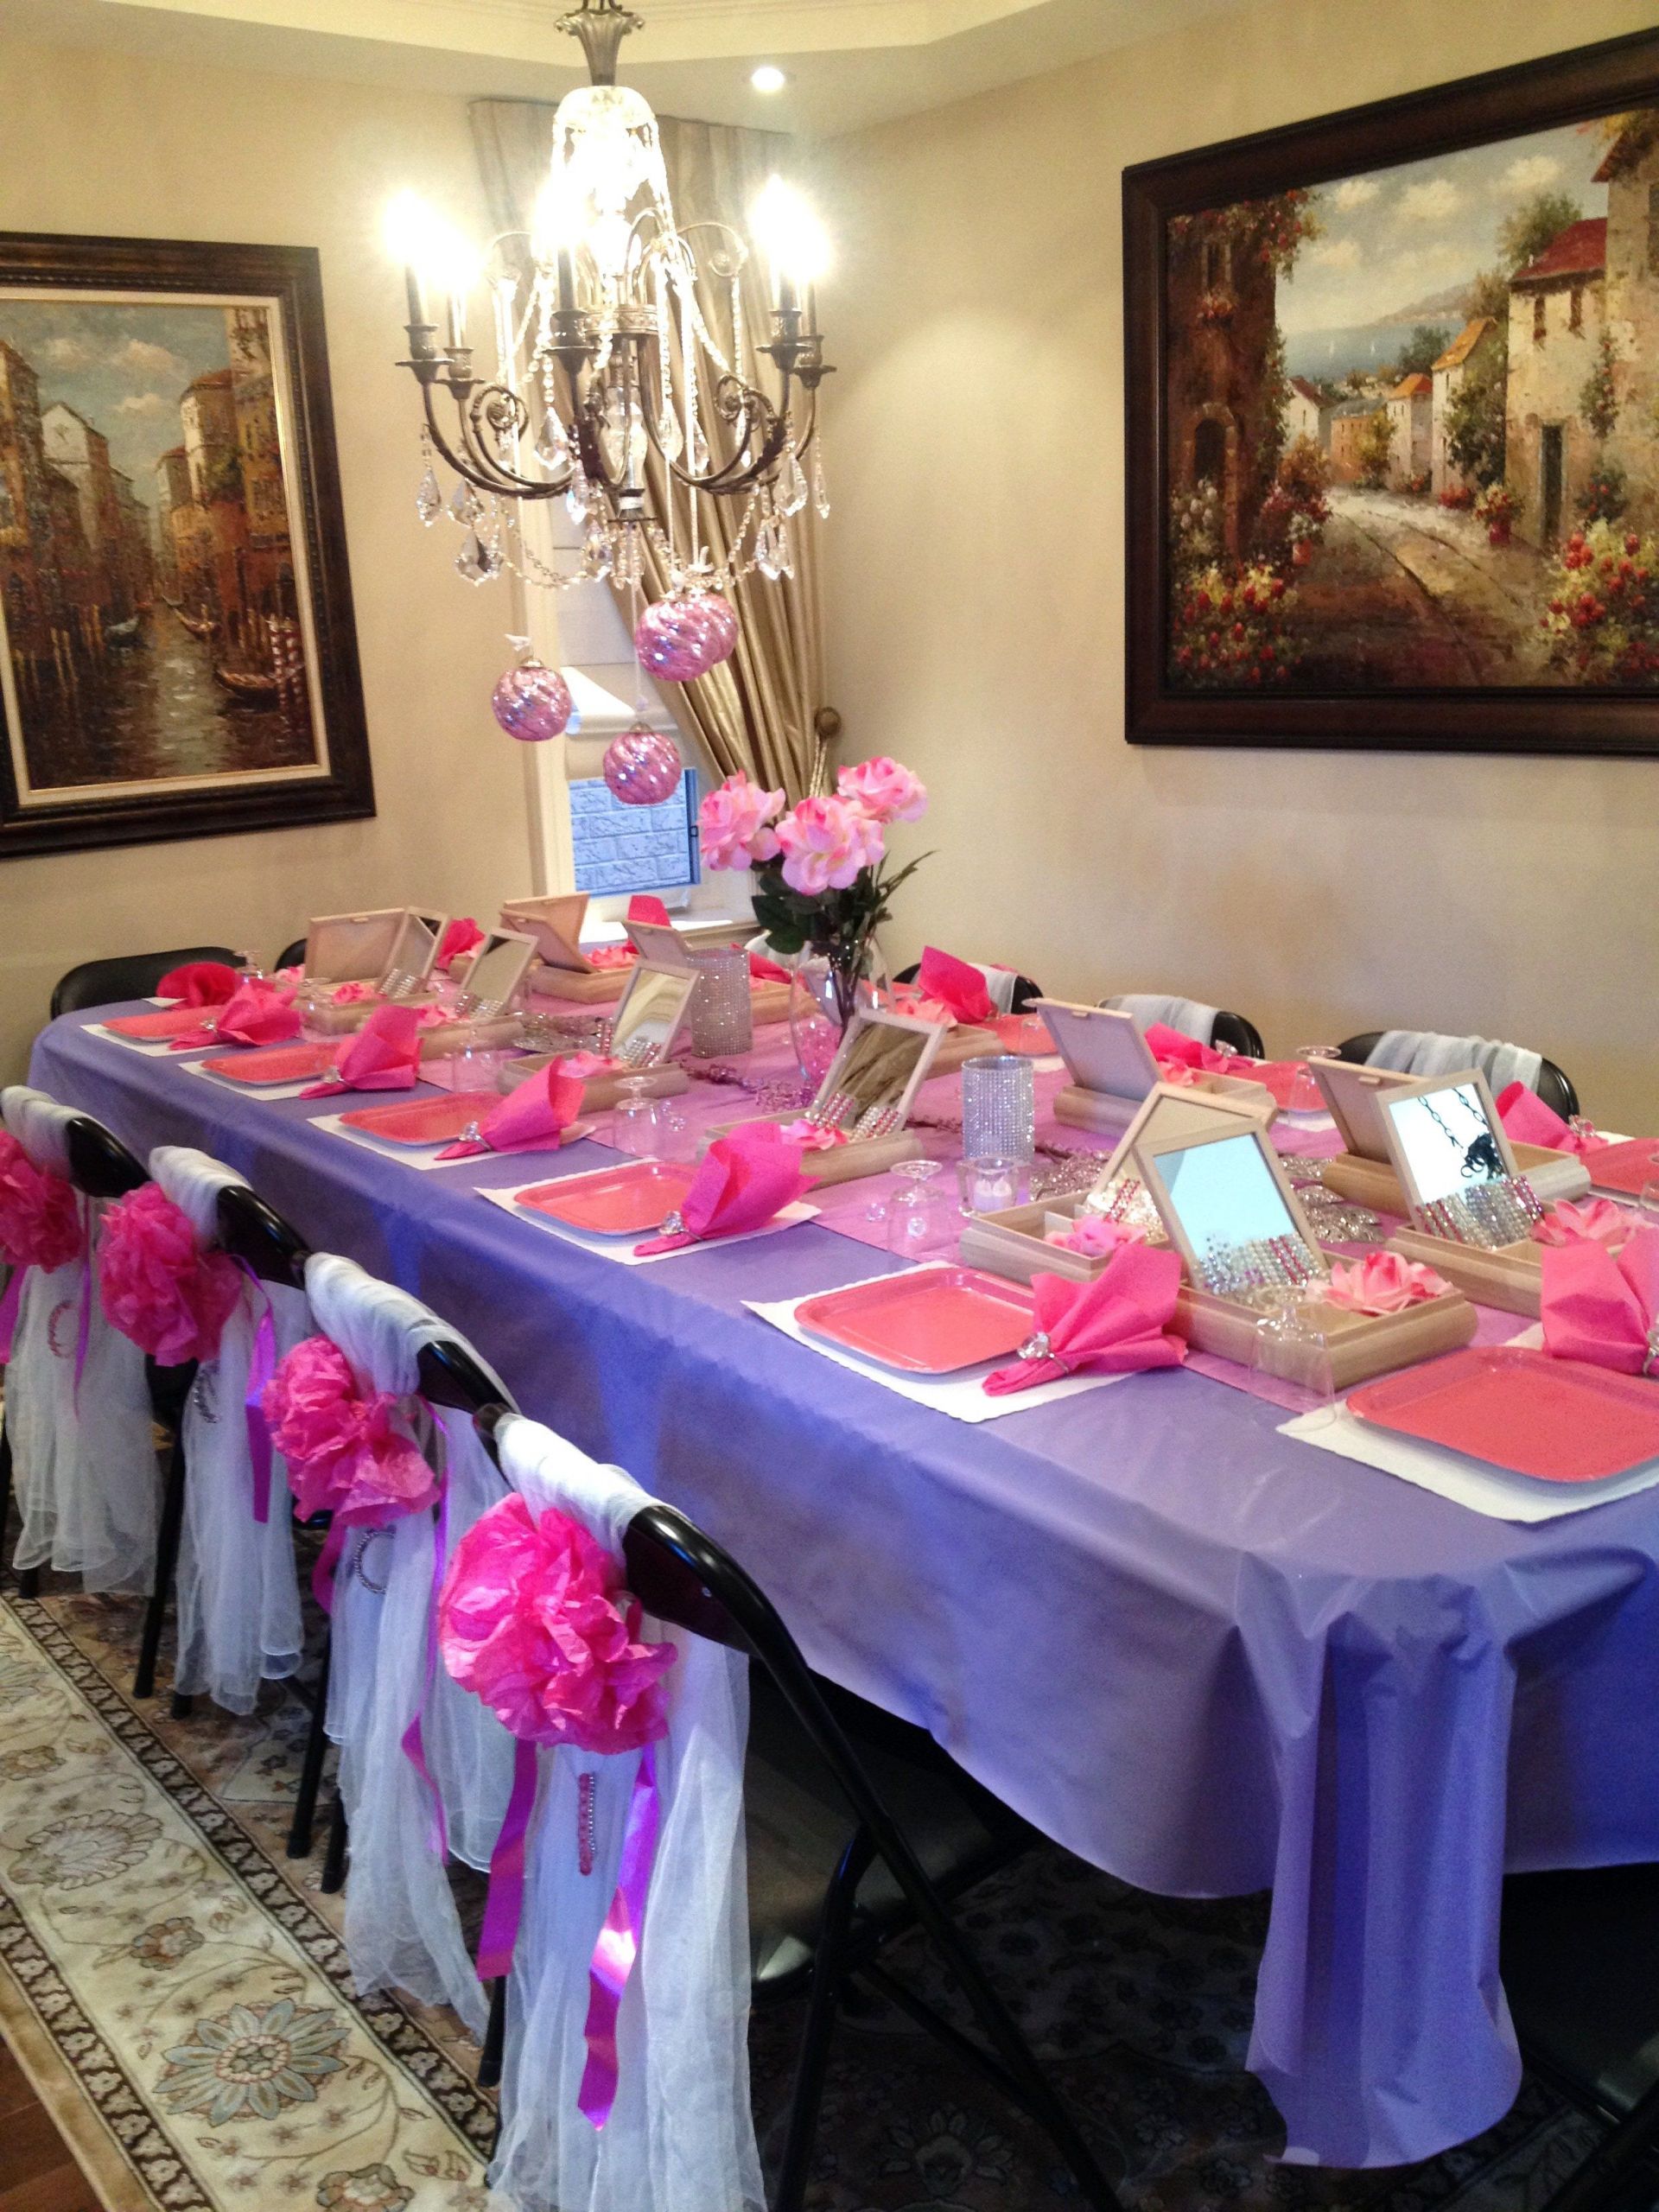 Birthday Party Ideas For 4 Year Old Girl
 This momma went all out She created a beautiful table